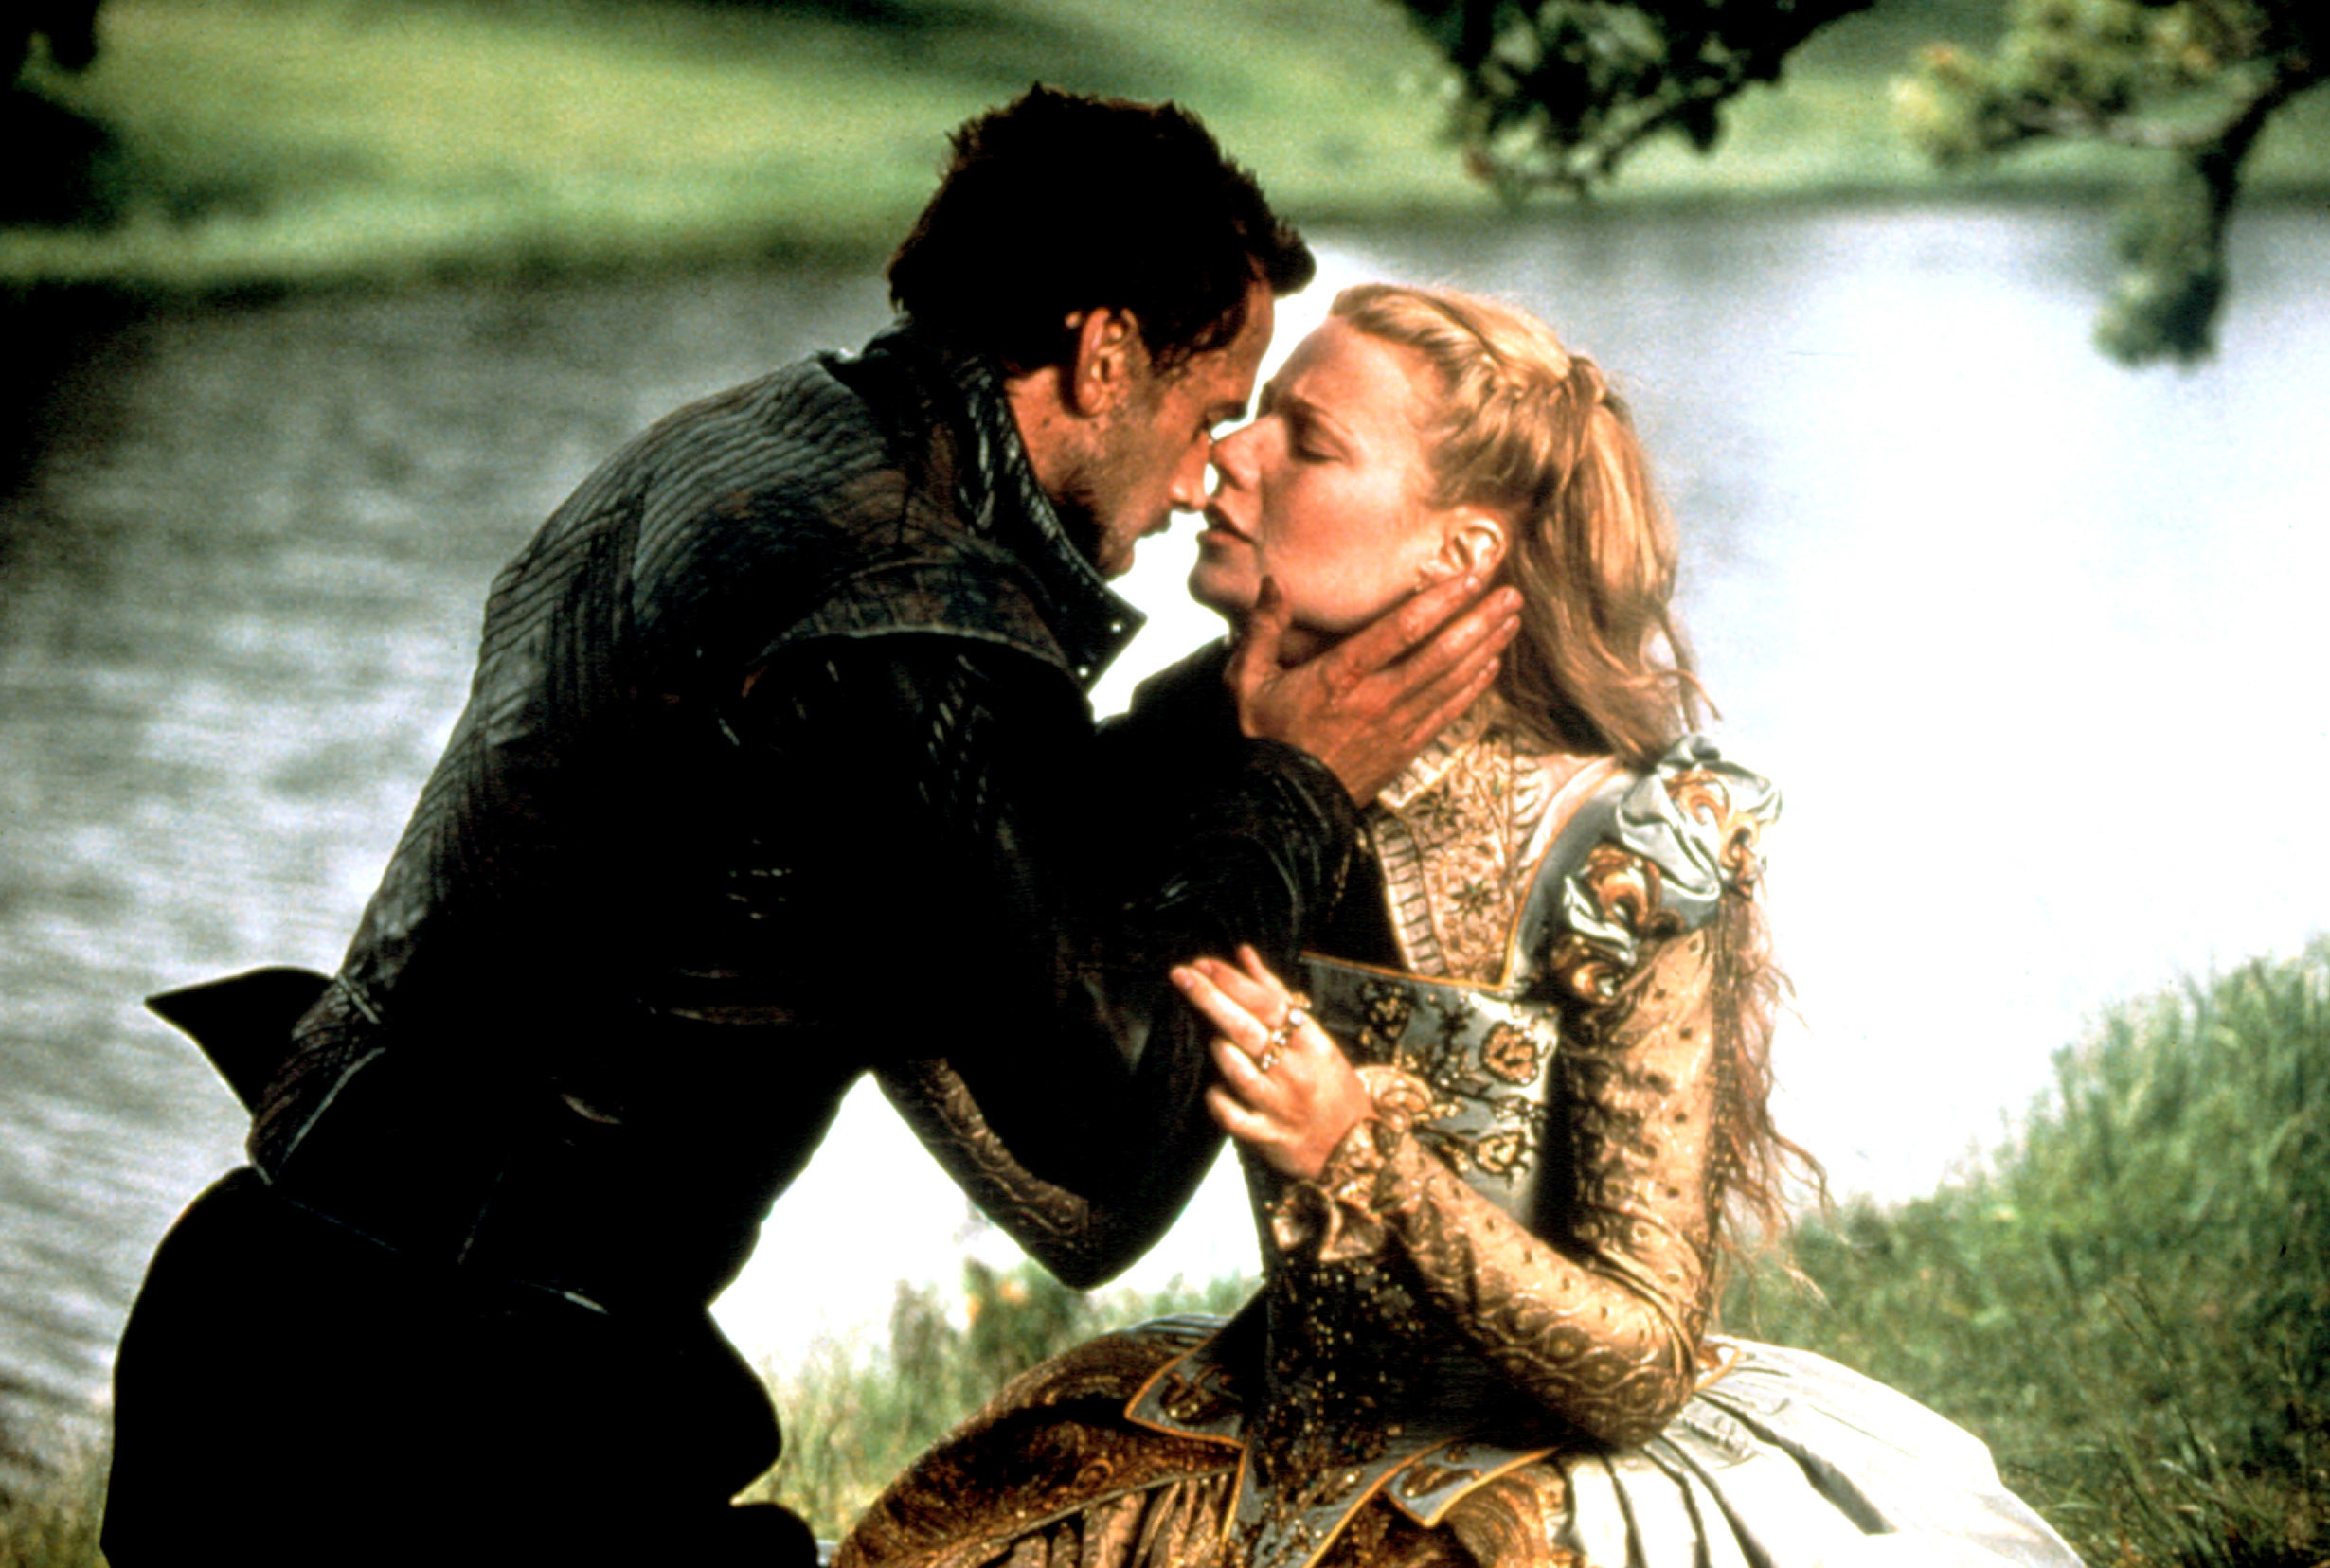 Joseph Fiennes and Gwyneth Paltrow kiss each other by a lake